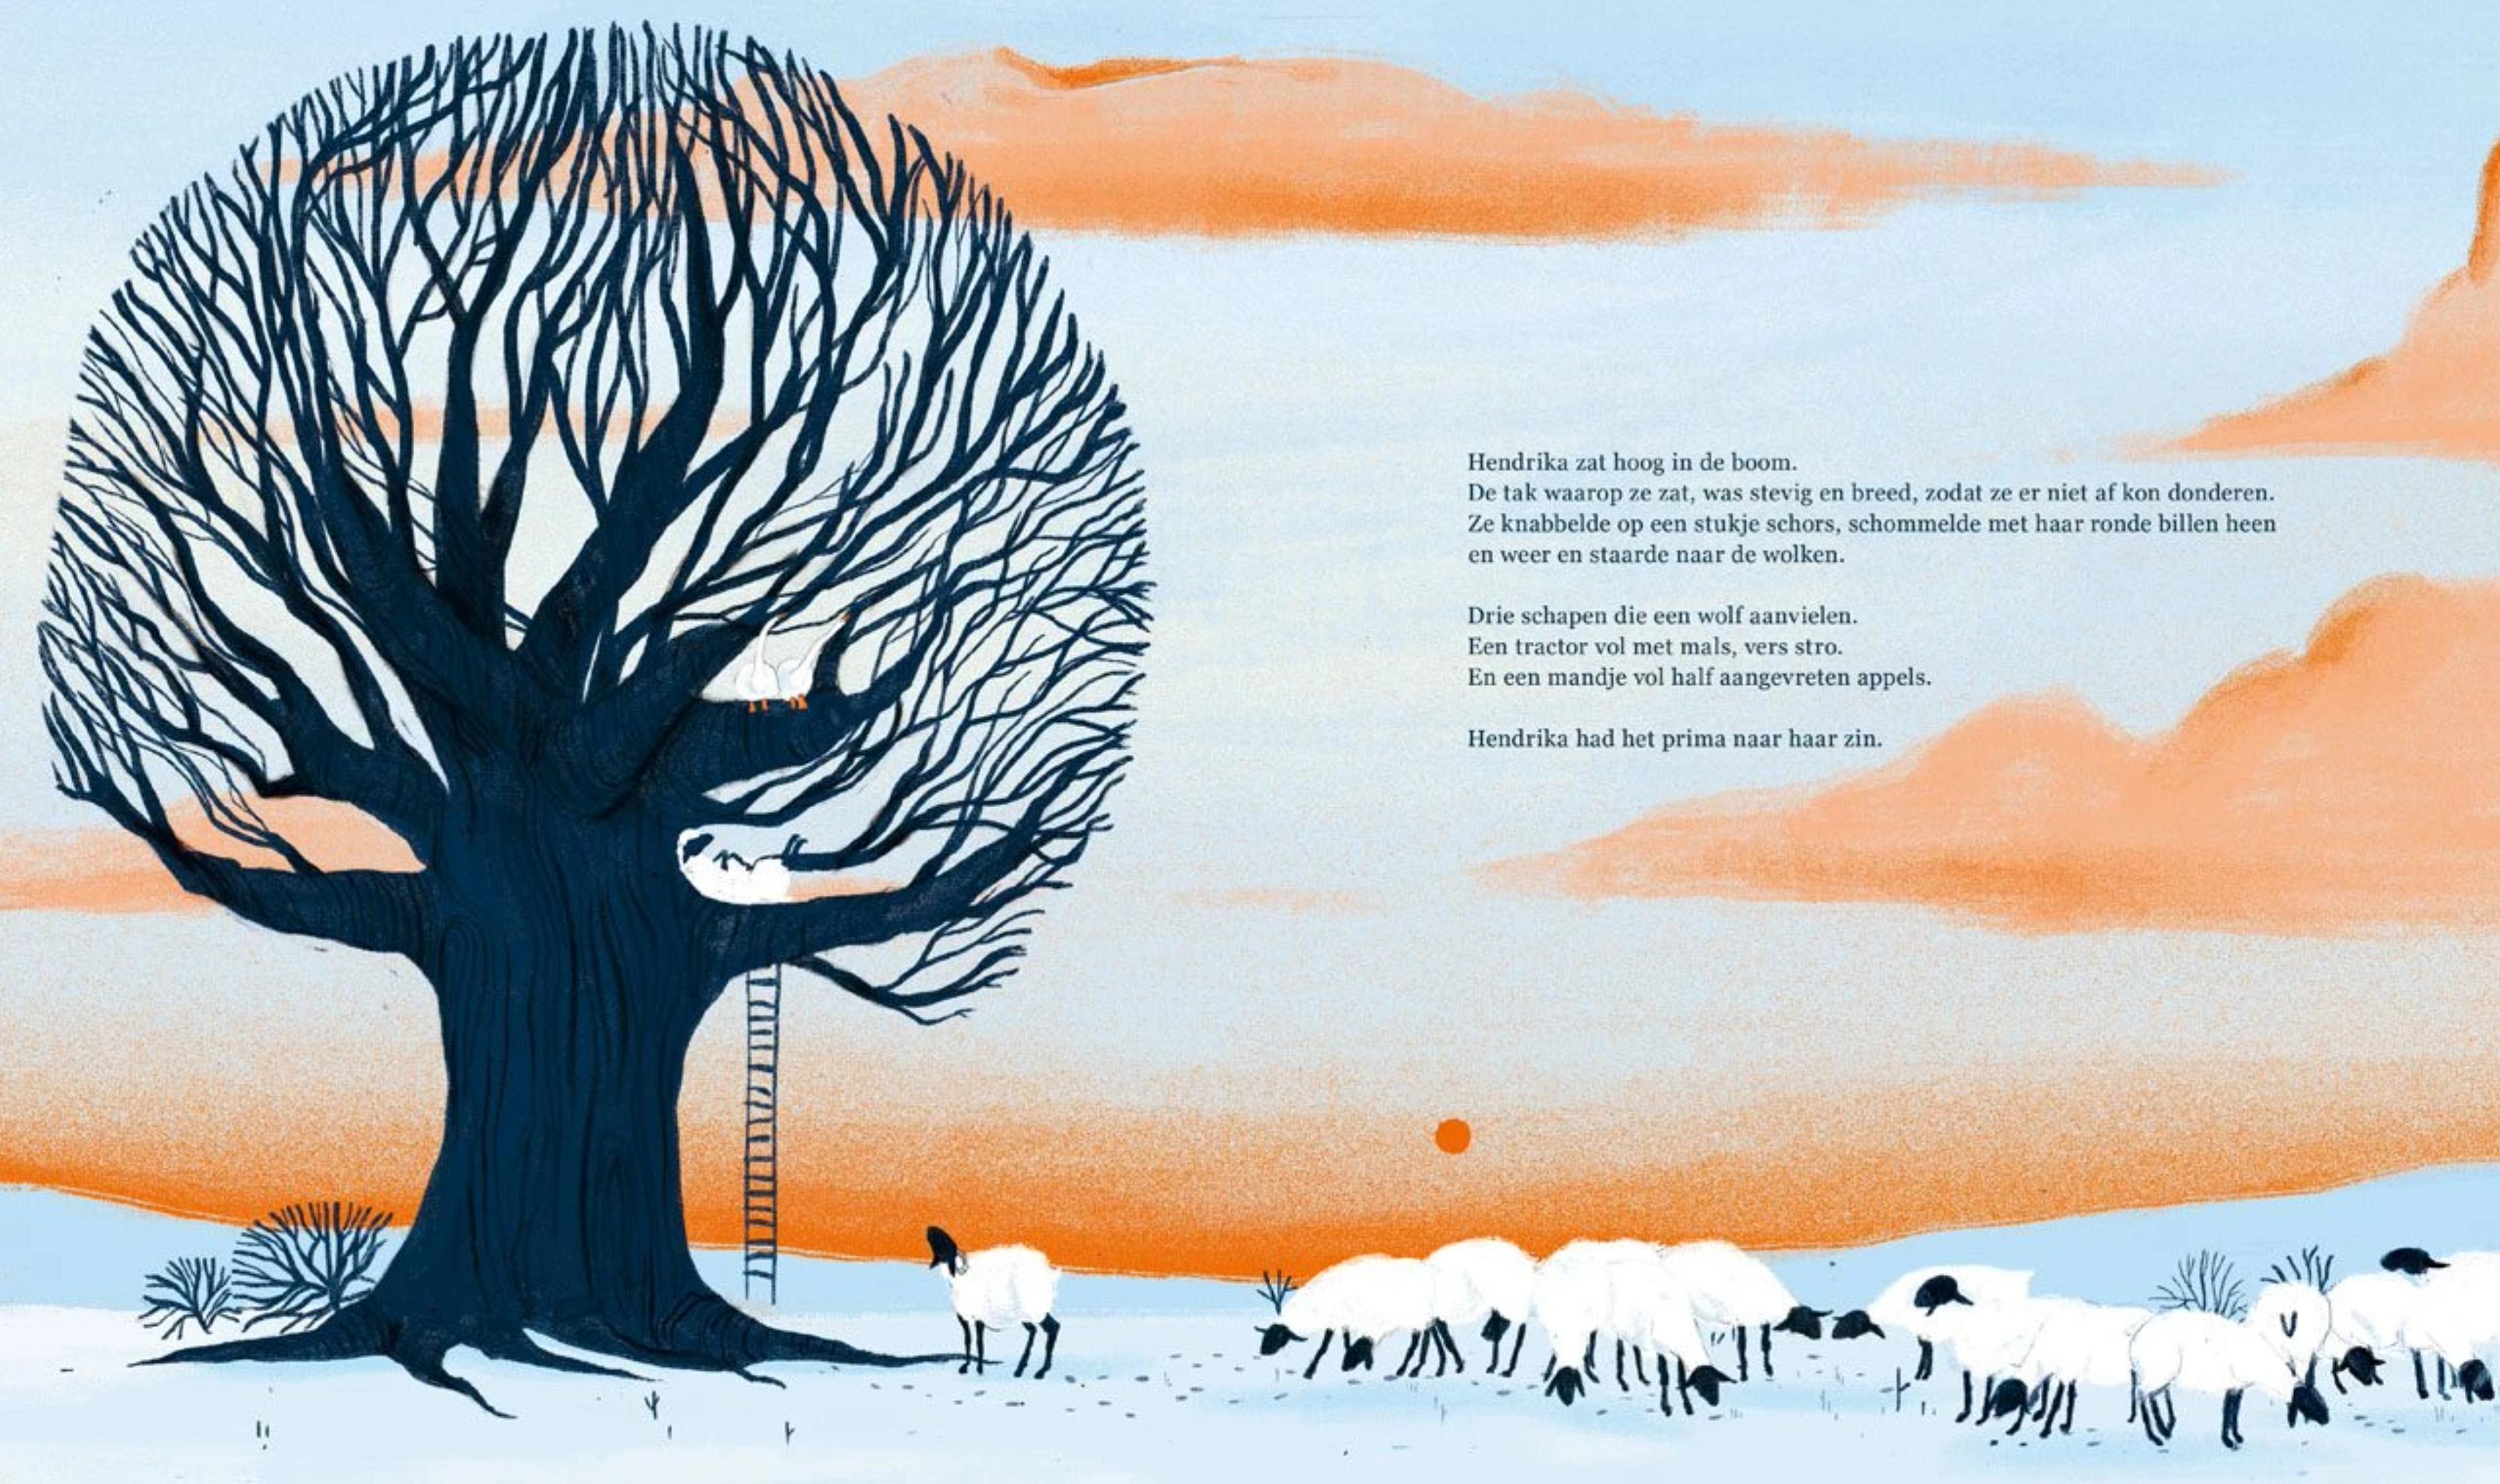 Image for Hendrika, the sheep that climbed a tree